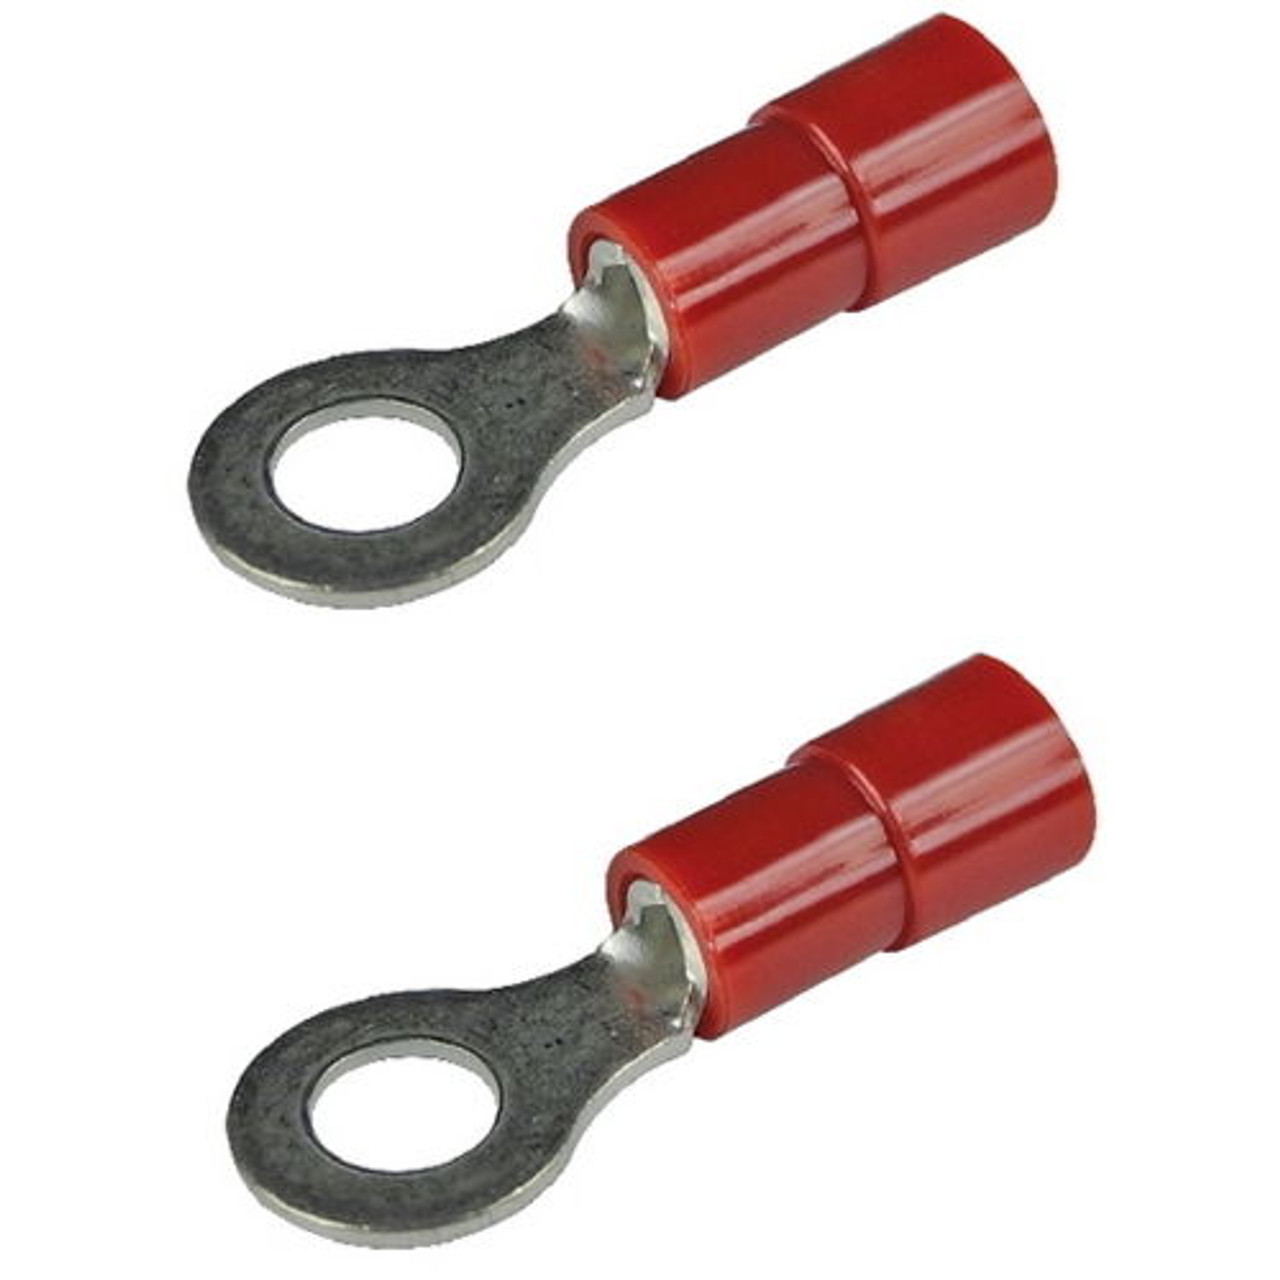 2 Pack Red 8 AWG Nylon Insulated #10 Ring Terminals for Boats